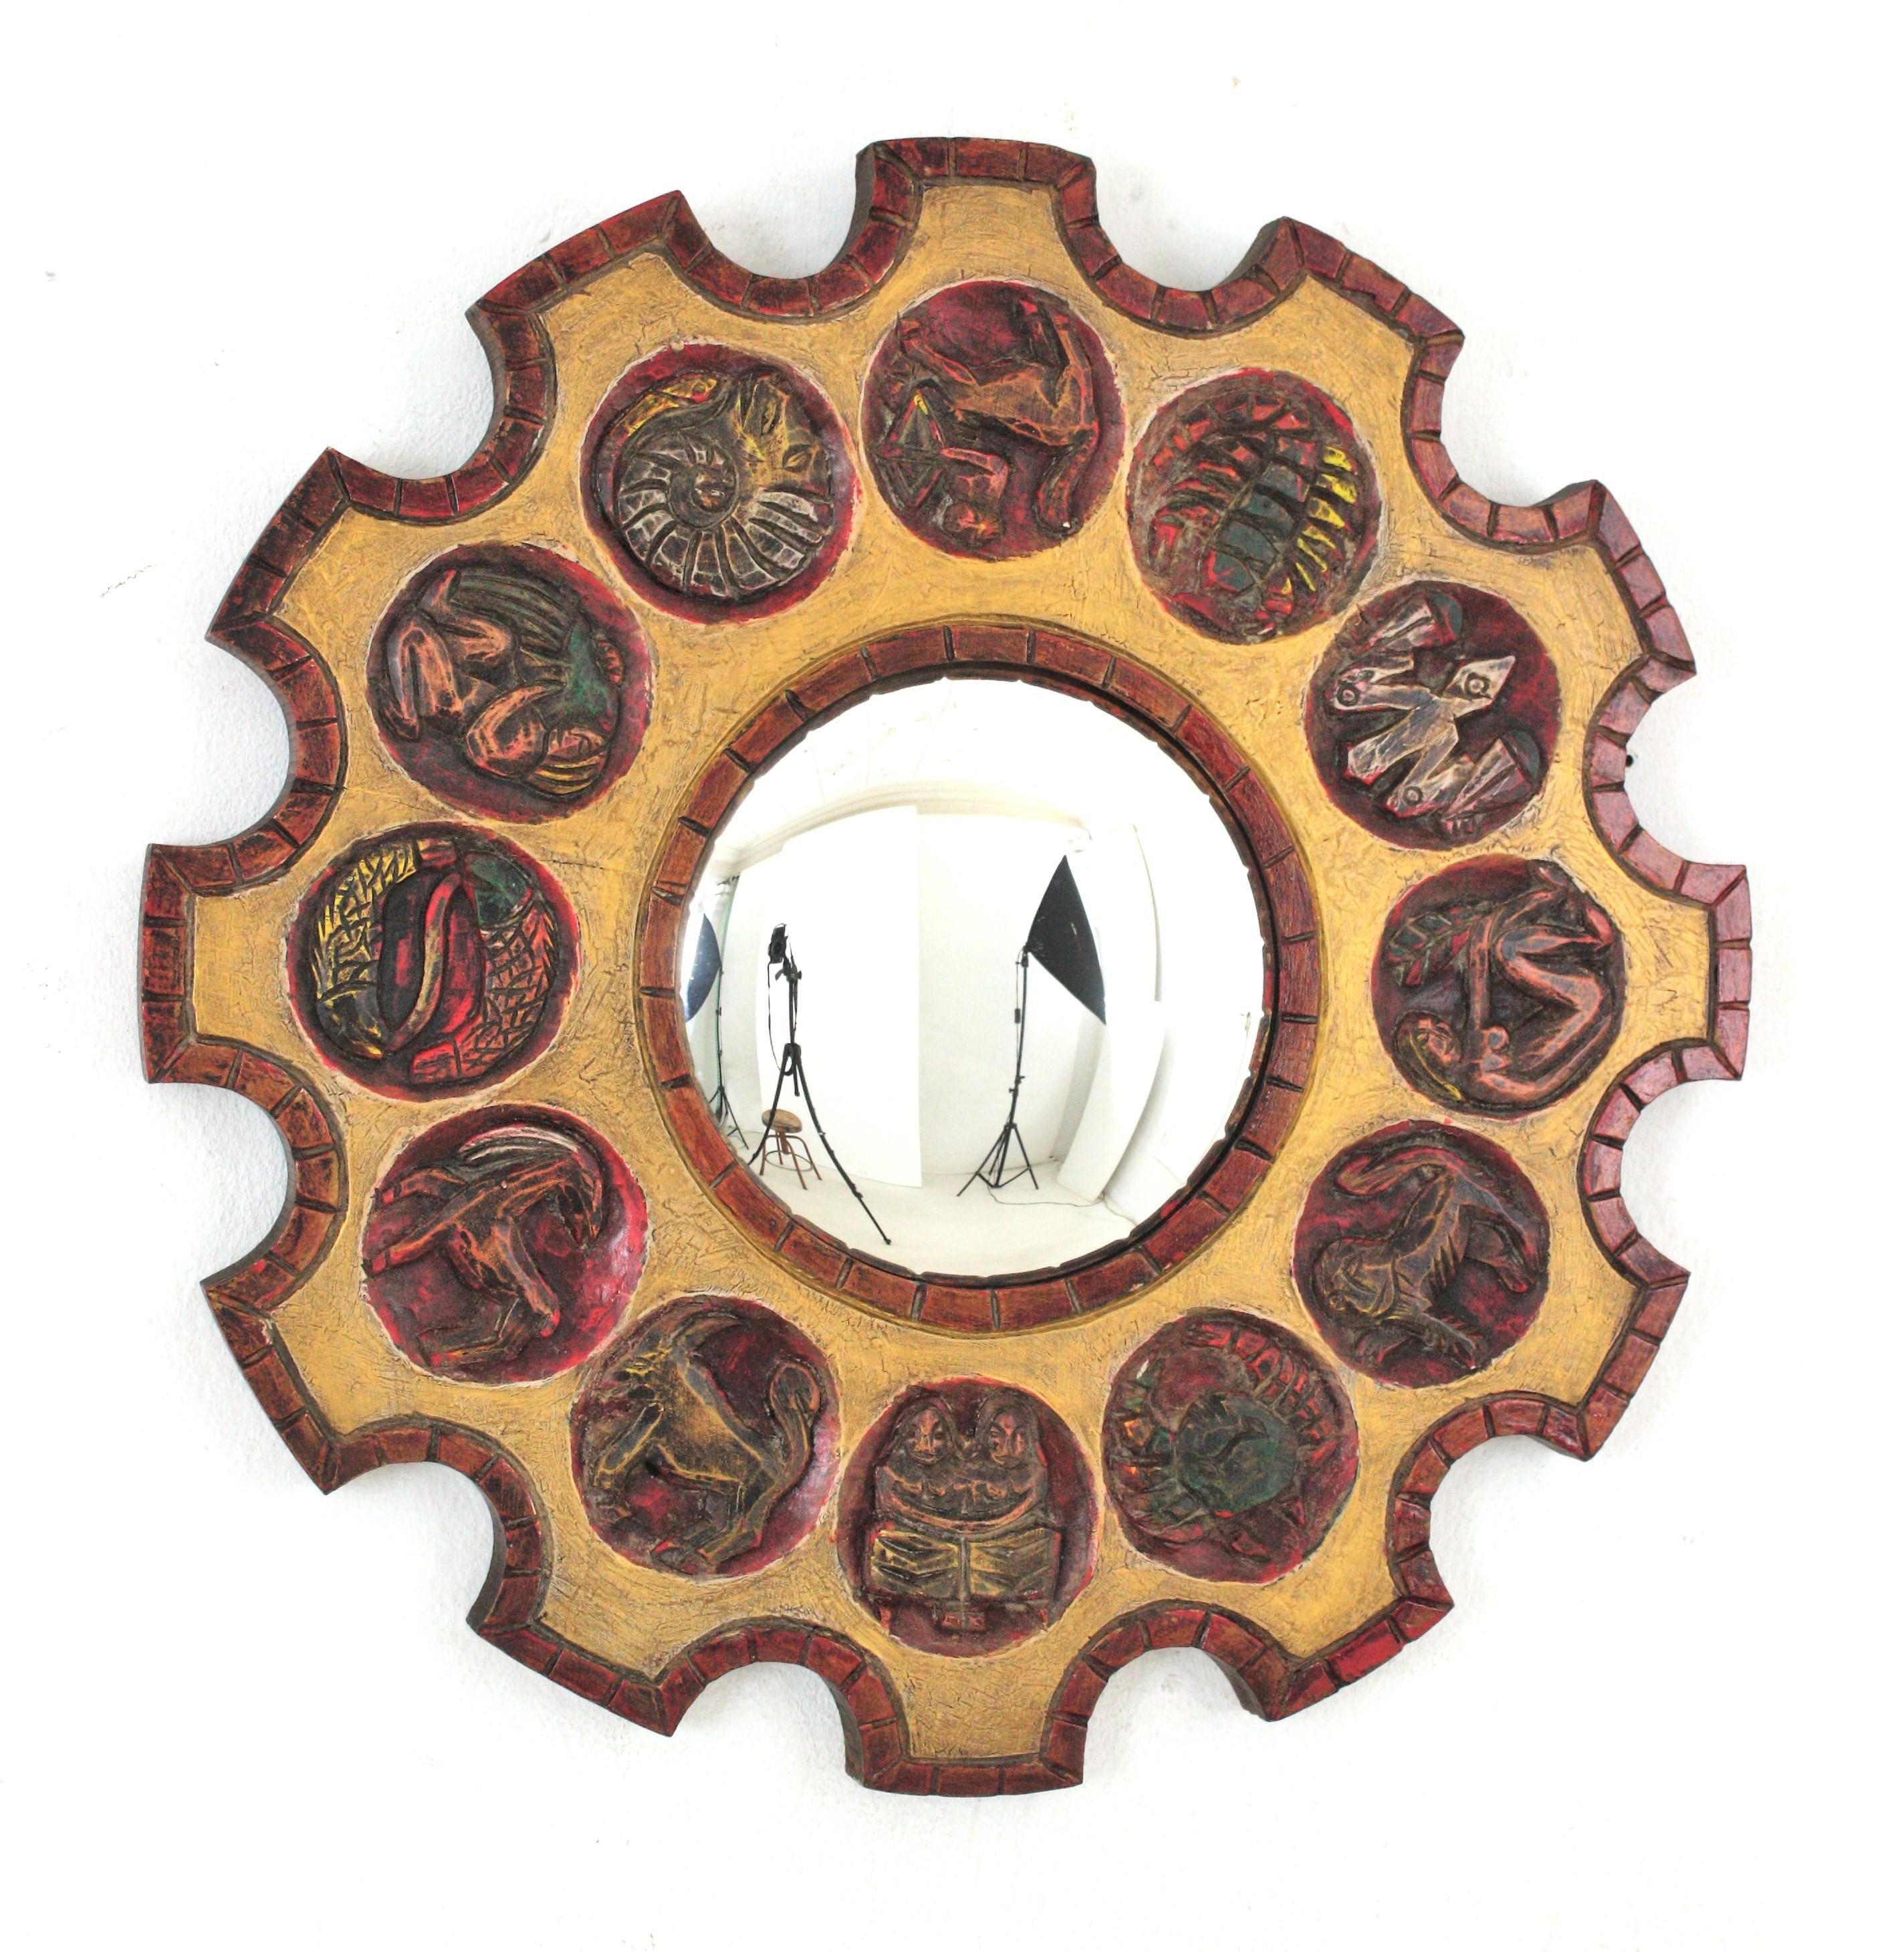 Zodiac sunburst convex mirror in Carved Wood, Spain, 1950s-1960s
Handcrafted Horoscope mirror with red and giltwood wheel frame and 12 signs of zodiac.
Stylized hand-carved zodiac signs on a starburst gilt wooden frame with red accents surrounding a